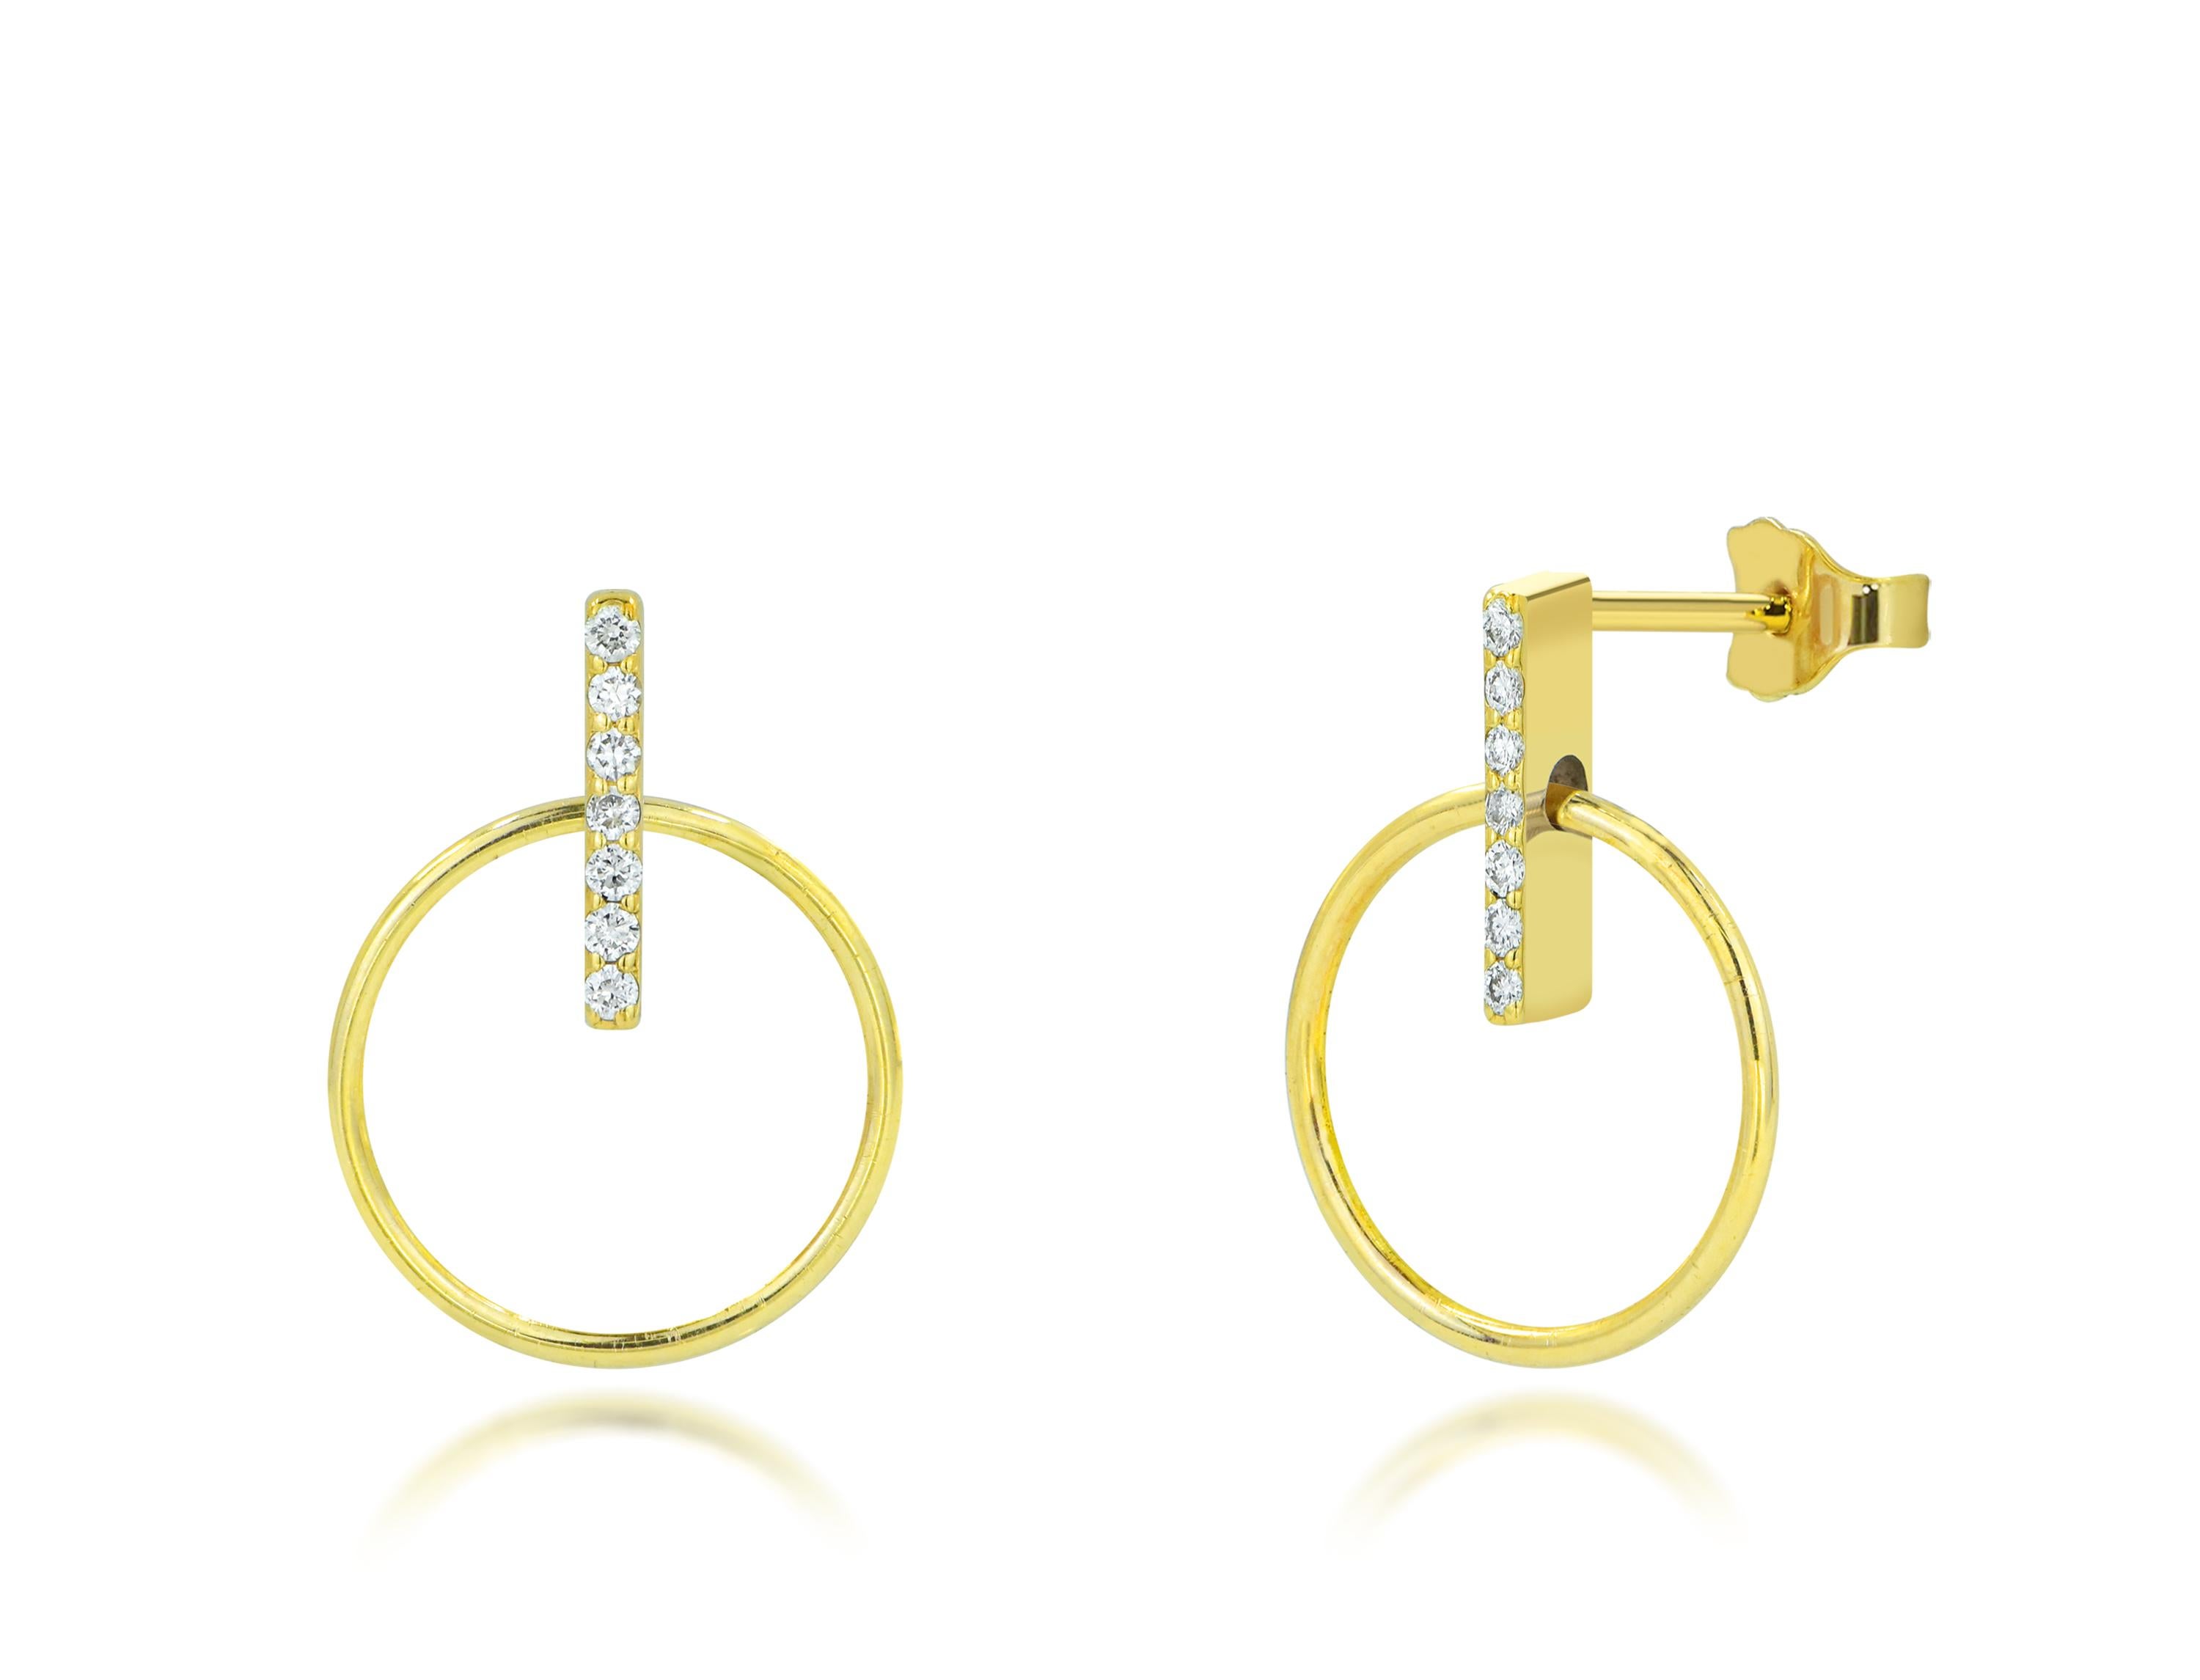 Unique Diamond Earrings are made of 18k solid gold.
Available in three colors of gold: White Gold / Rose Gold / Yellow Gold.

These Dainty Stud Earrings are made of 18k Gold featuring shiny brilliant round cut natural diamonds set by master setter